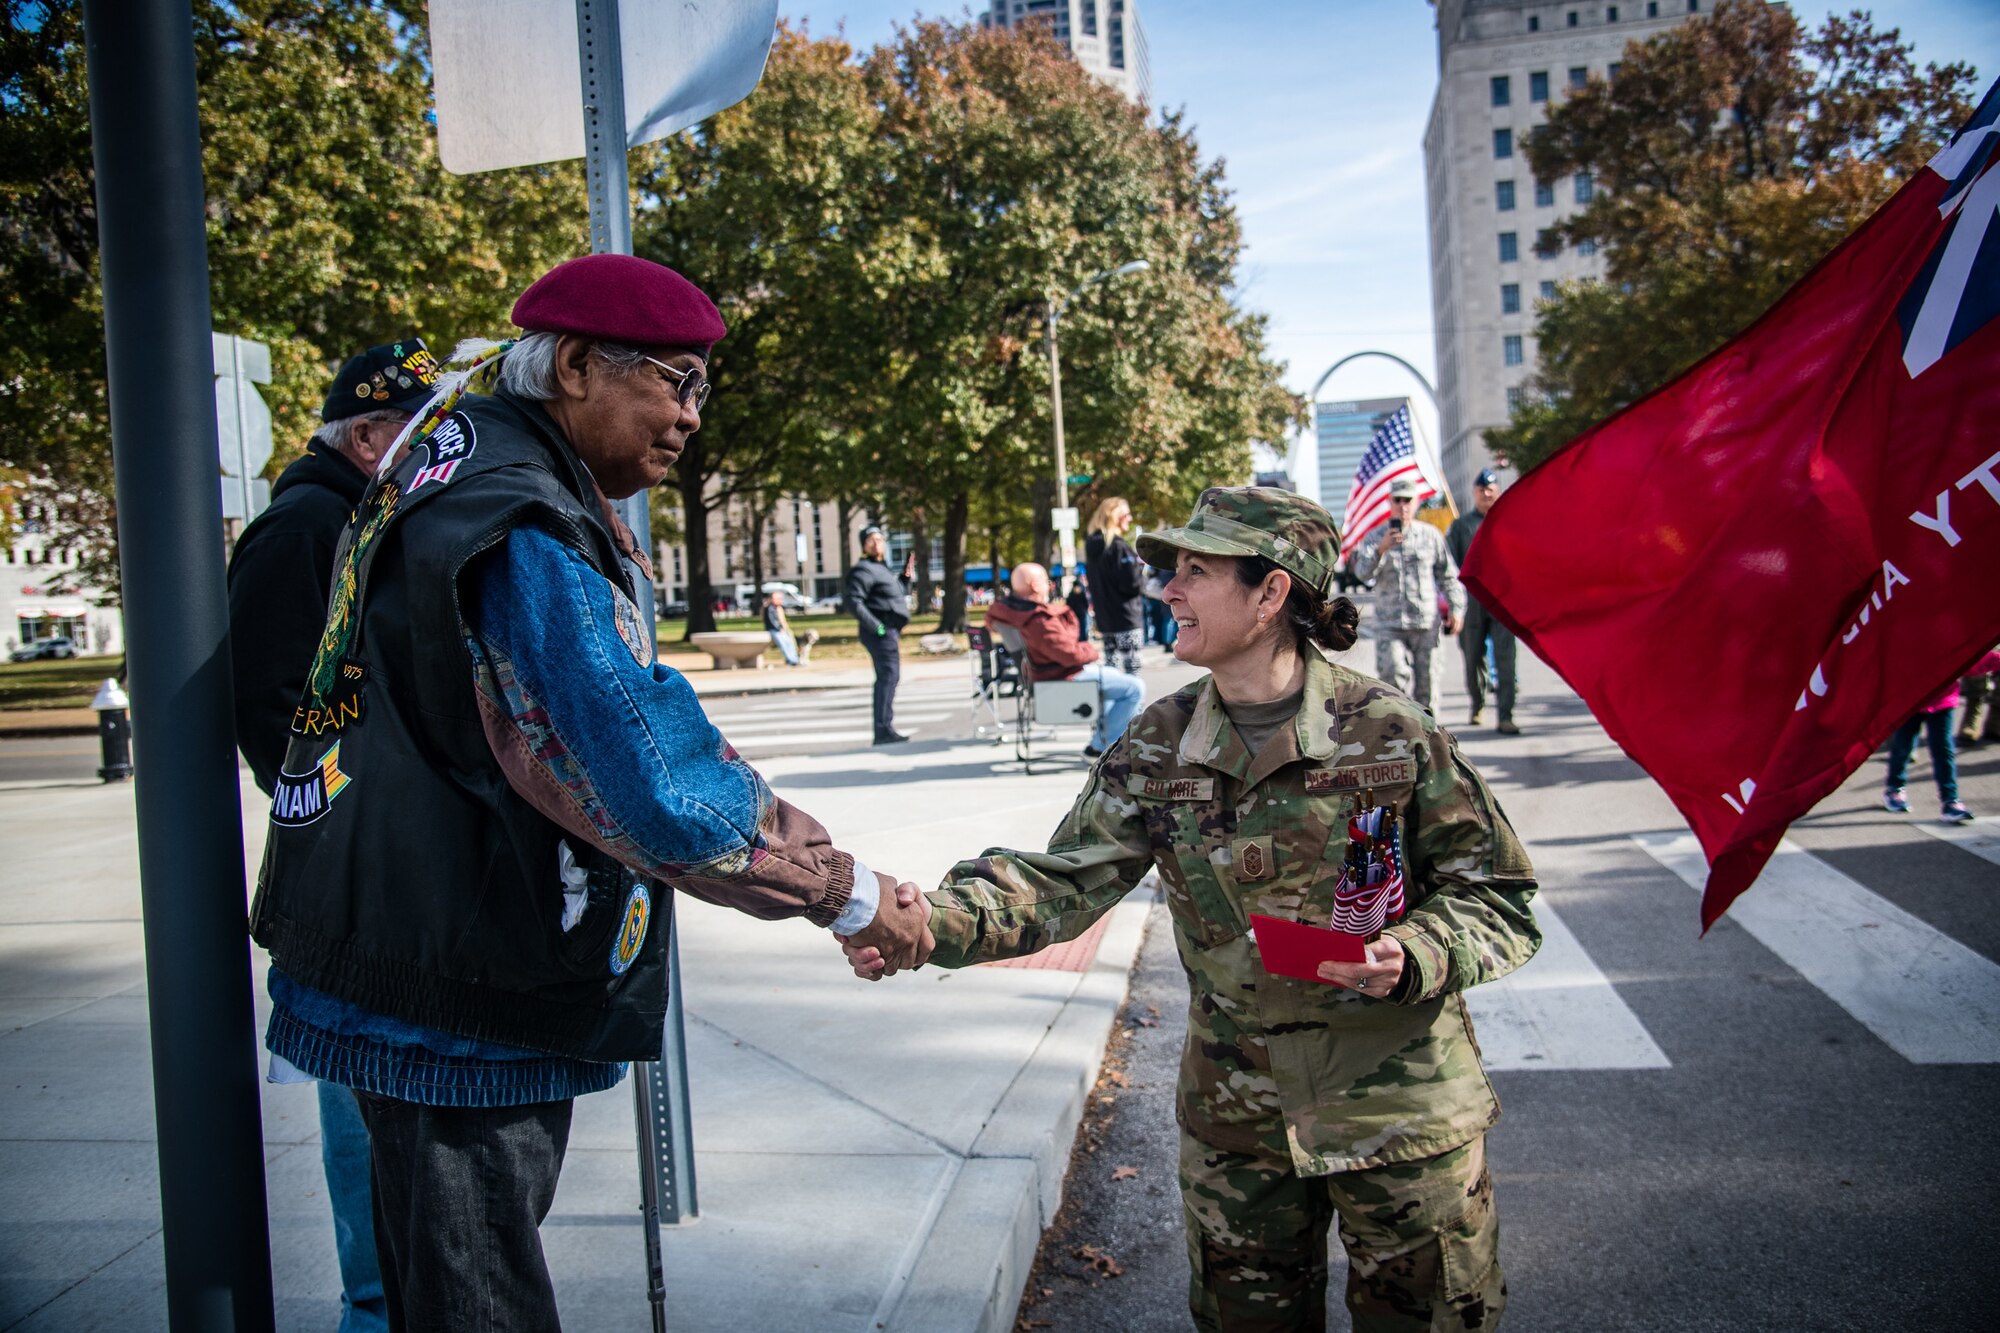 932nd Airlift Wing Command Chief Master Sgt. Barbara Gilmore thanks a veteran during the St. Louis Veterans Day Parade, downtown St. Louis, Missouri, Nov. 9, 2019.(U.S. Air Force photo by Christopher Parr)